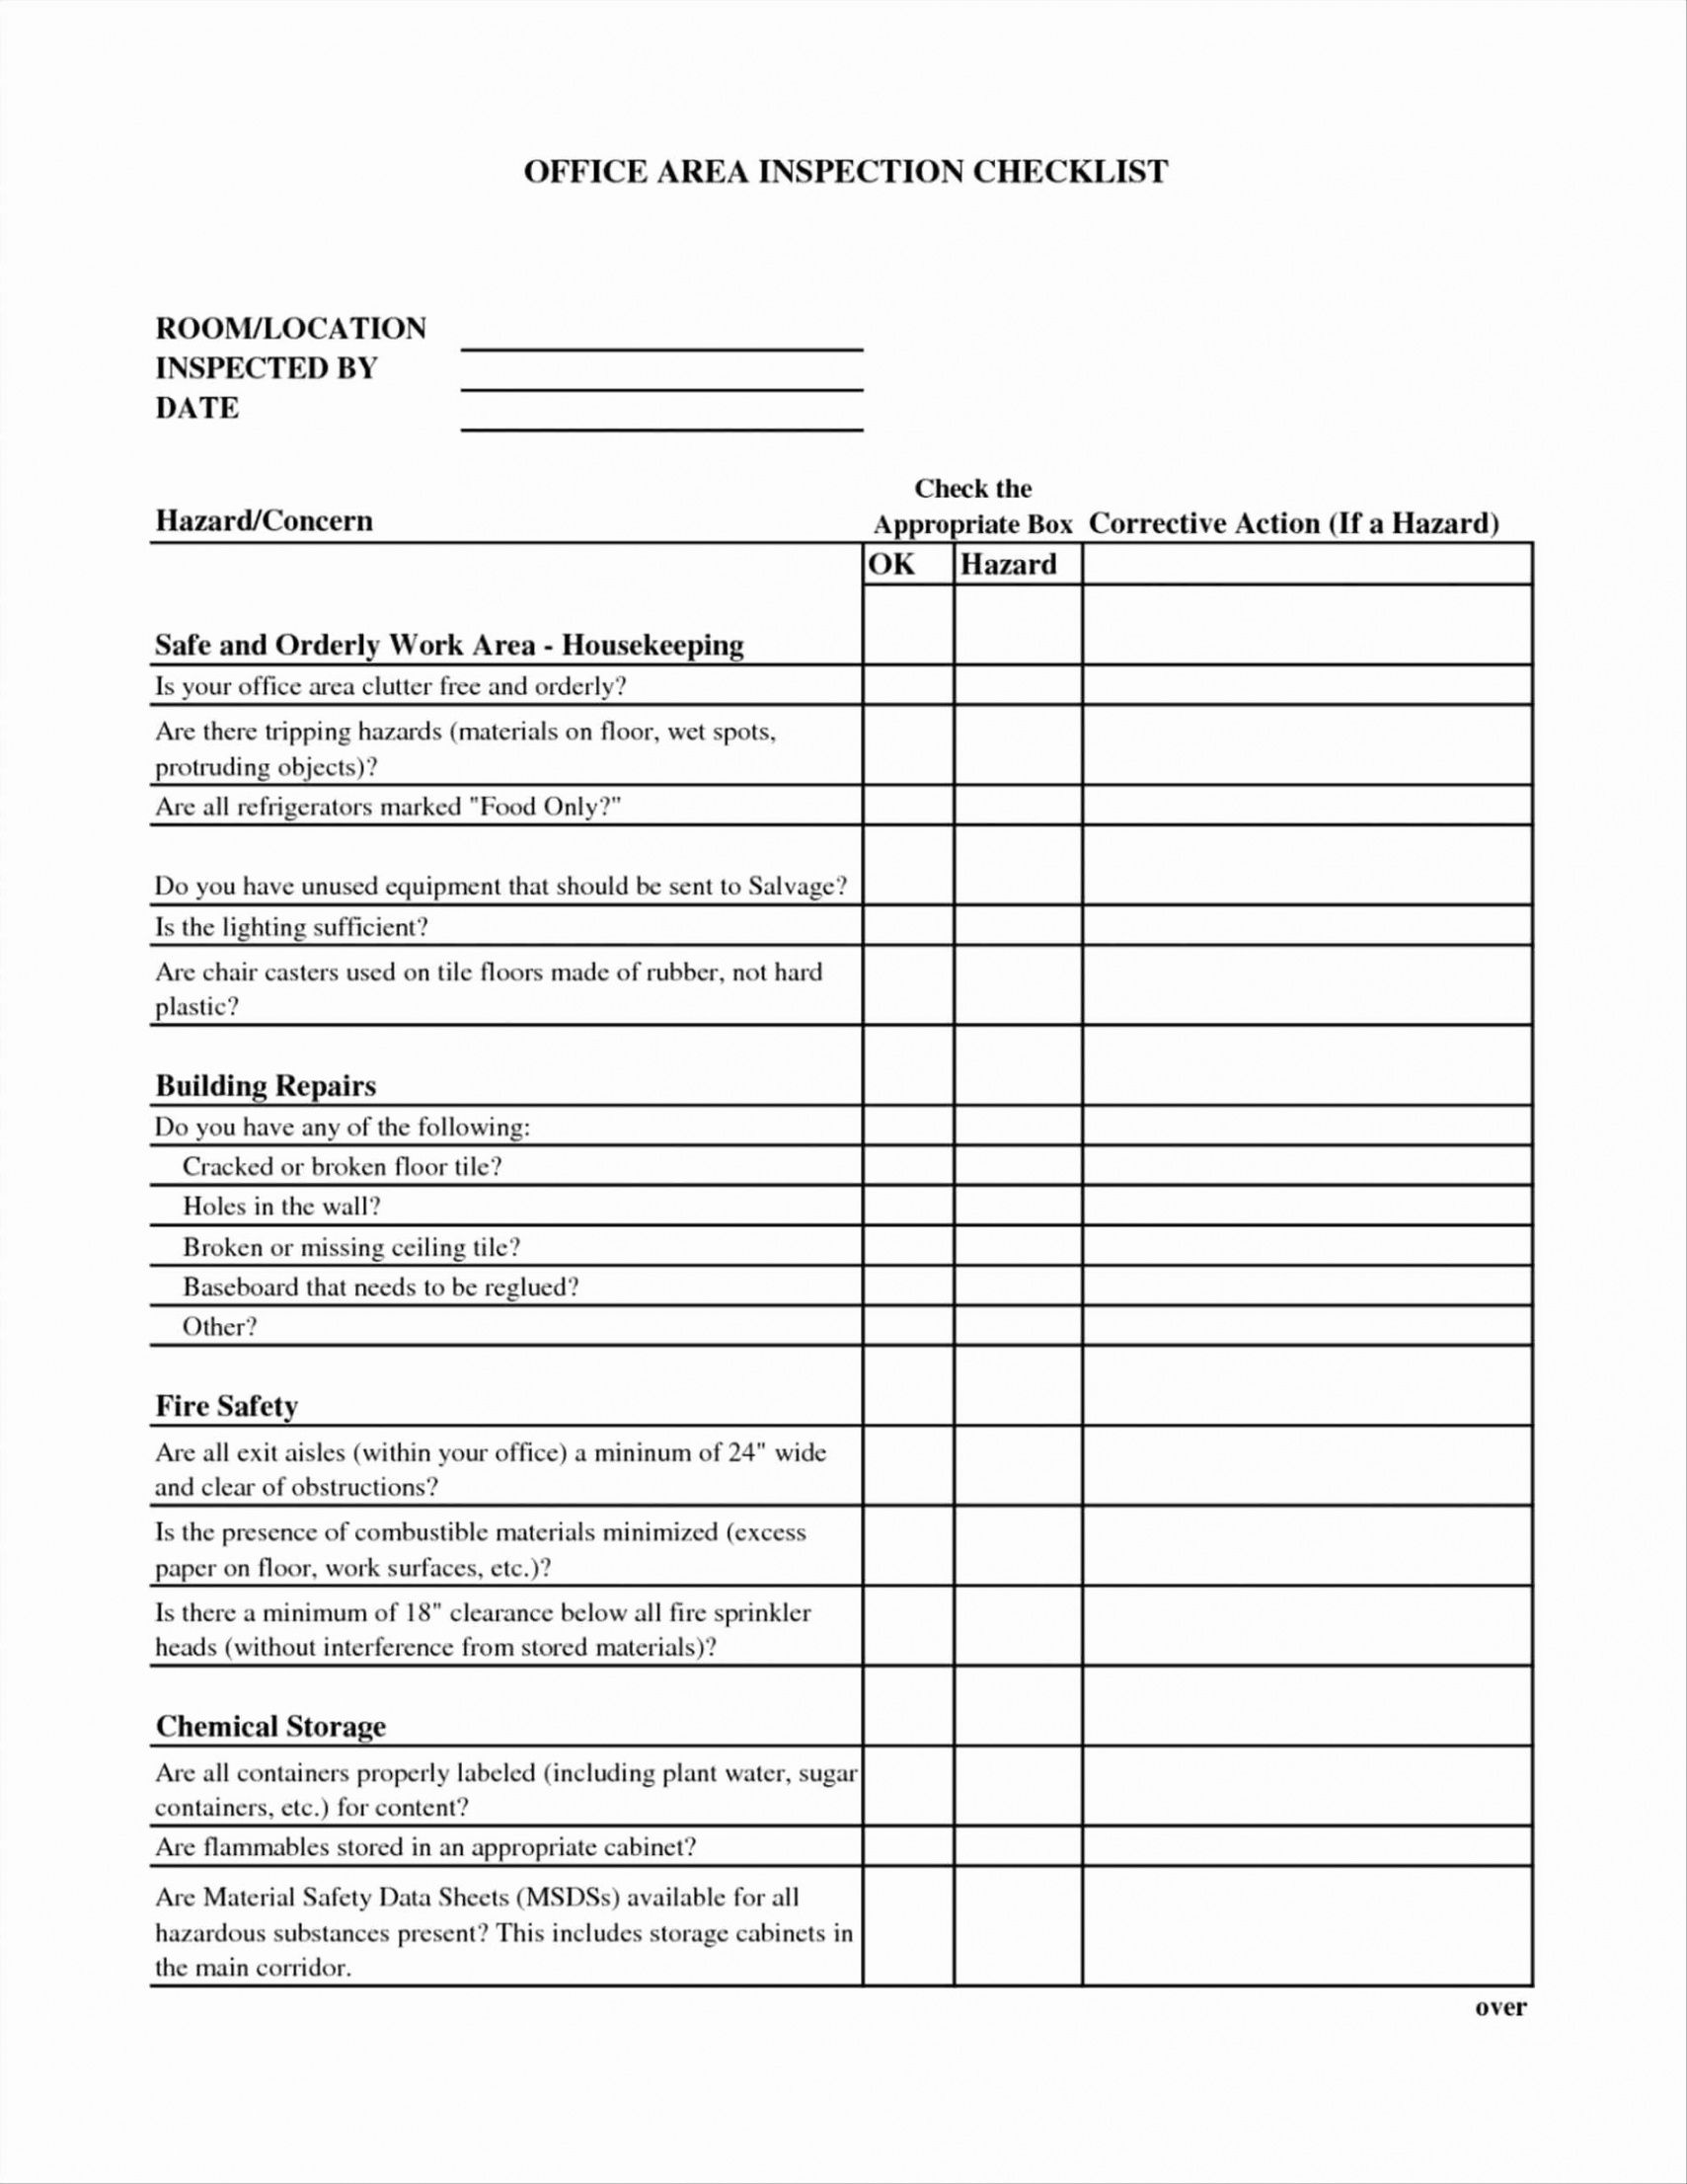 template design office health and safety checklist template scaffold inspection checklist free template pdf